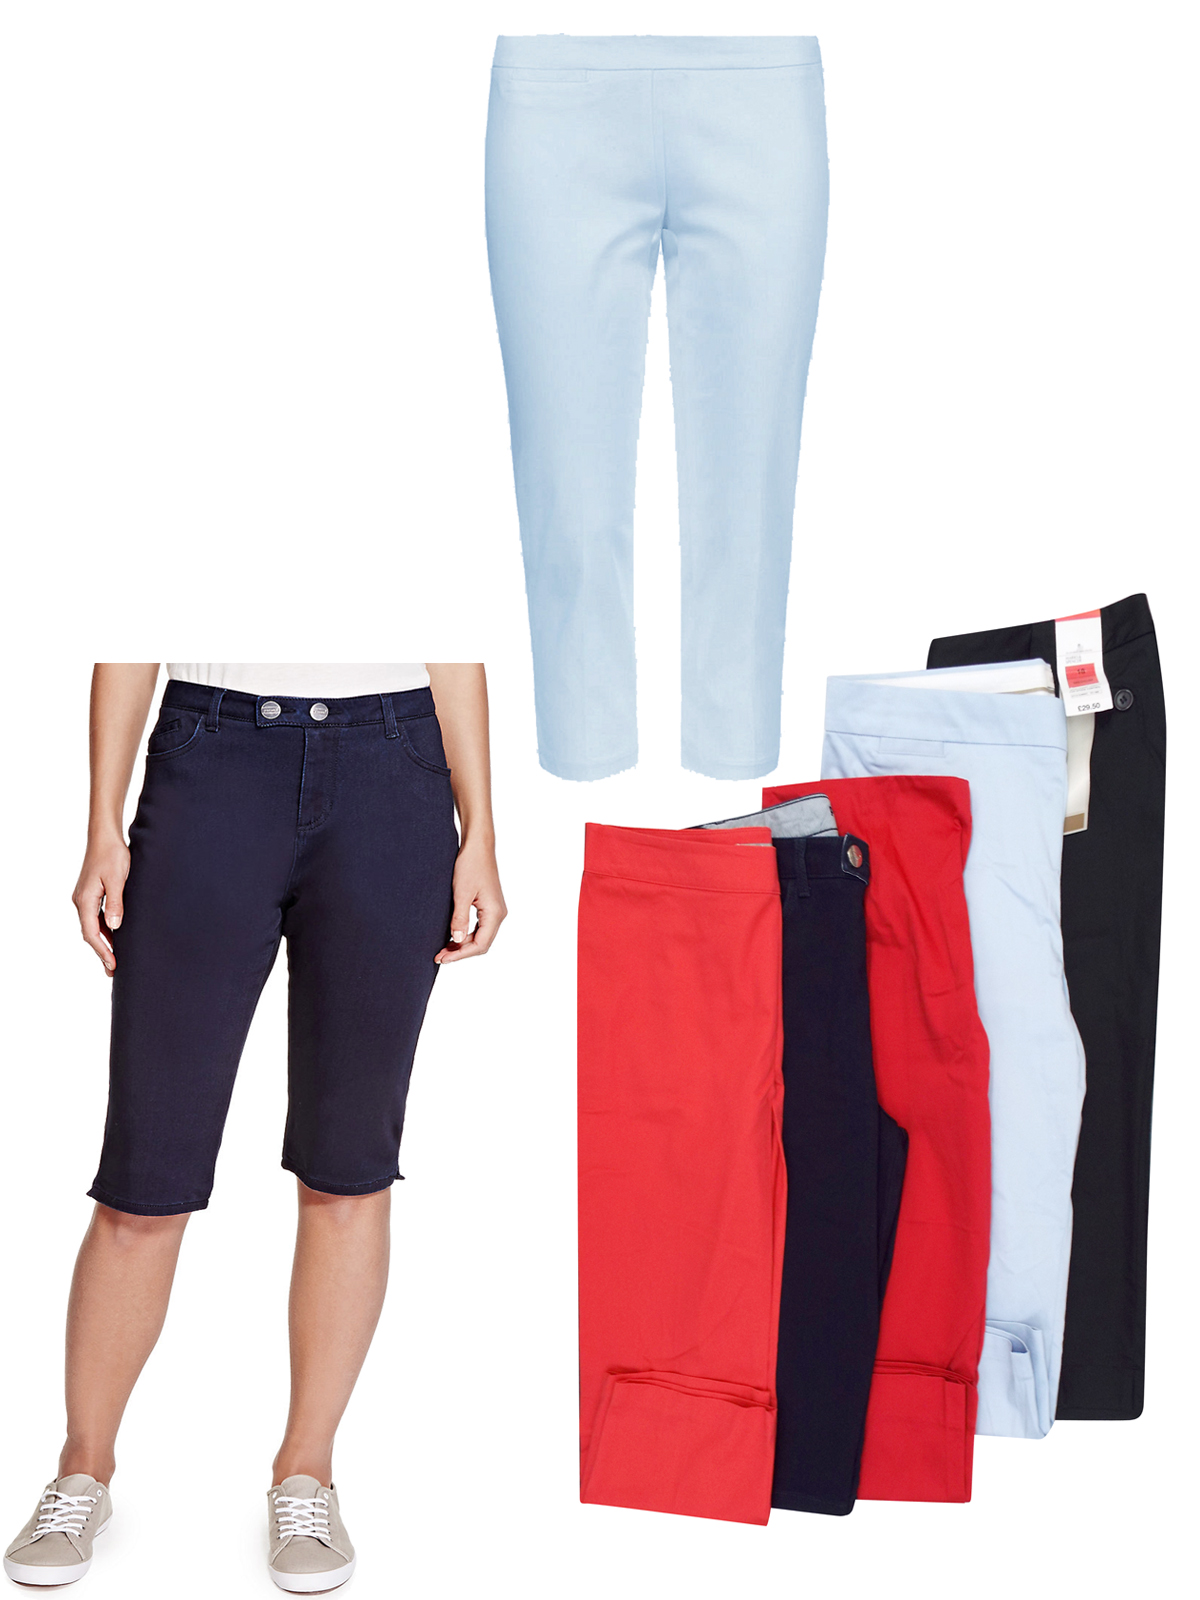 Marks and Spencer - - M&5 ASSORTED Cropped Trousers - Size 10 to 18